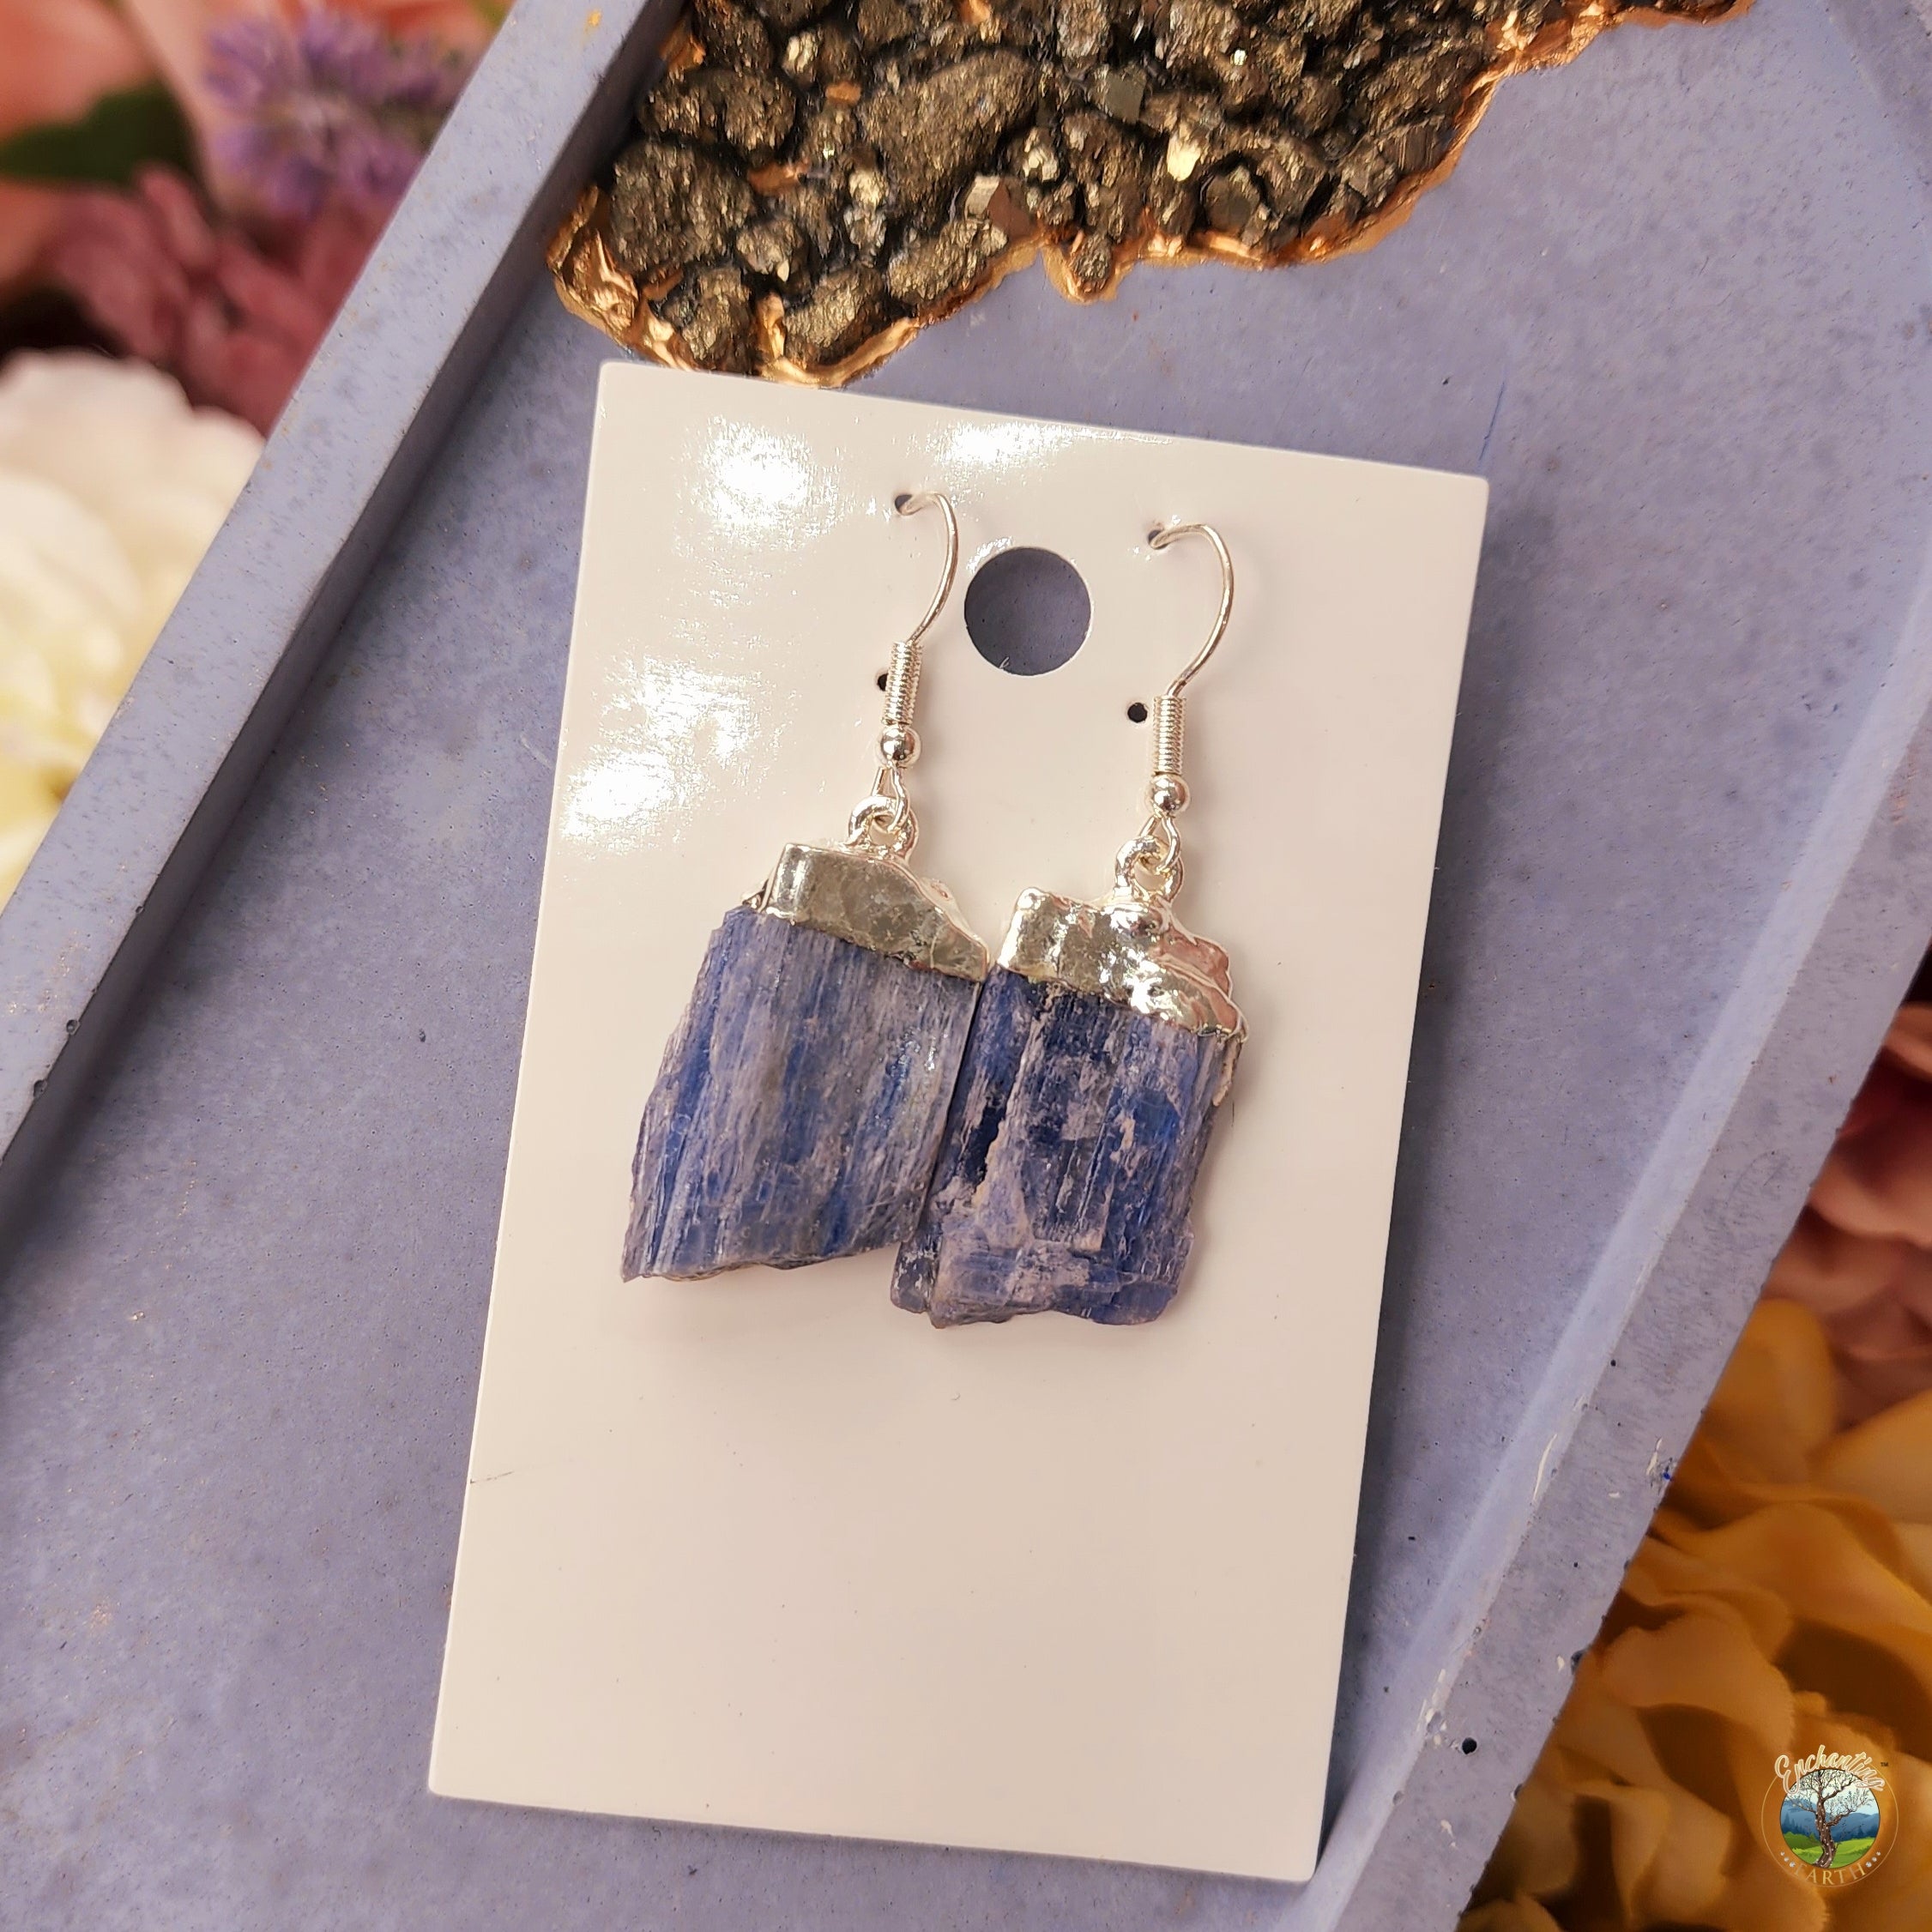 Kyanite Earrings for Communication and Harmony